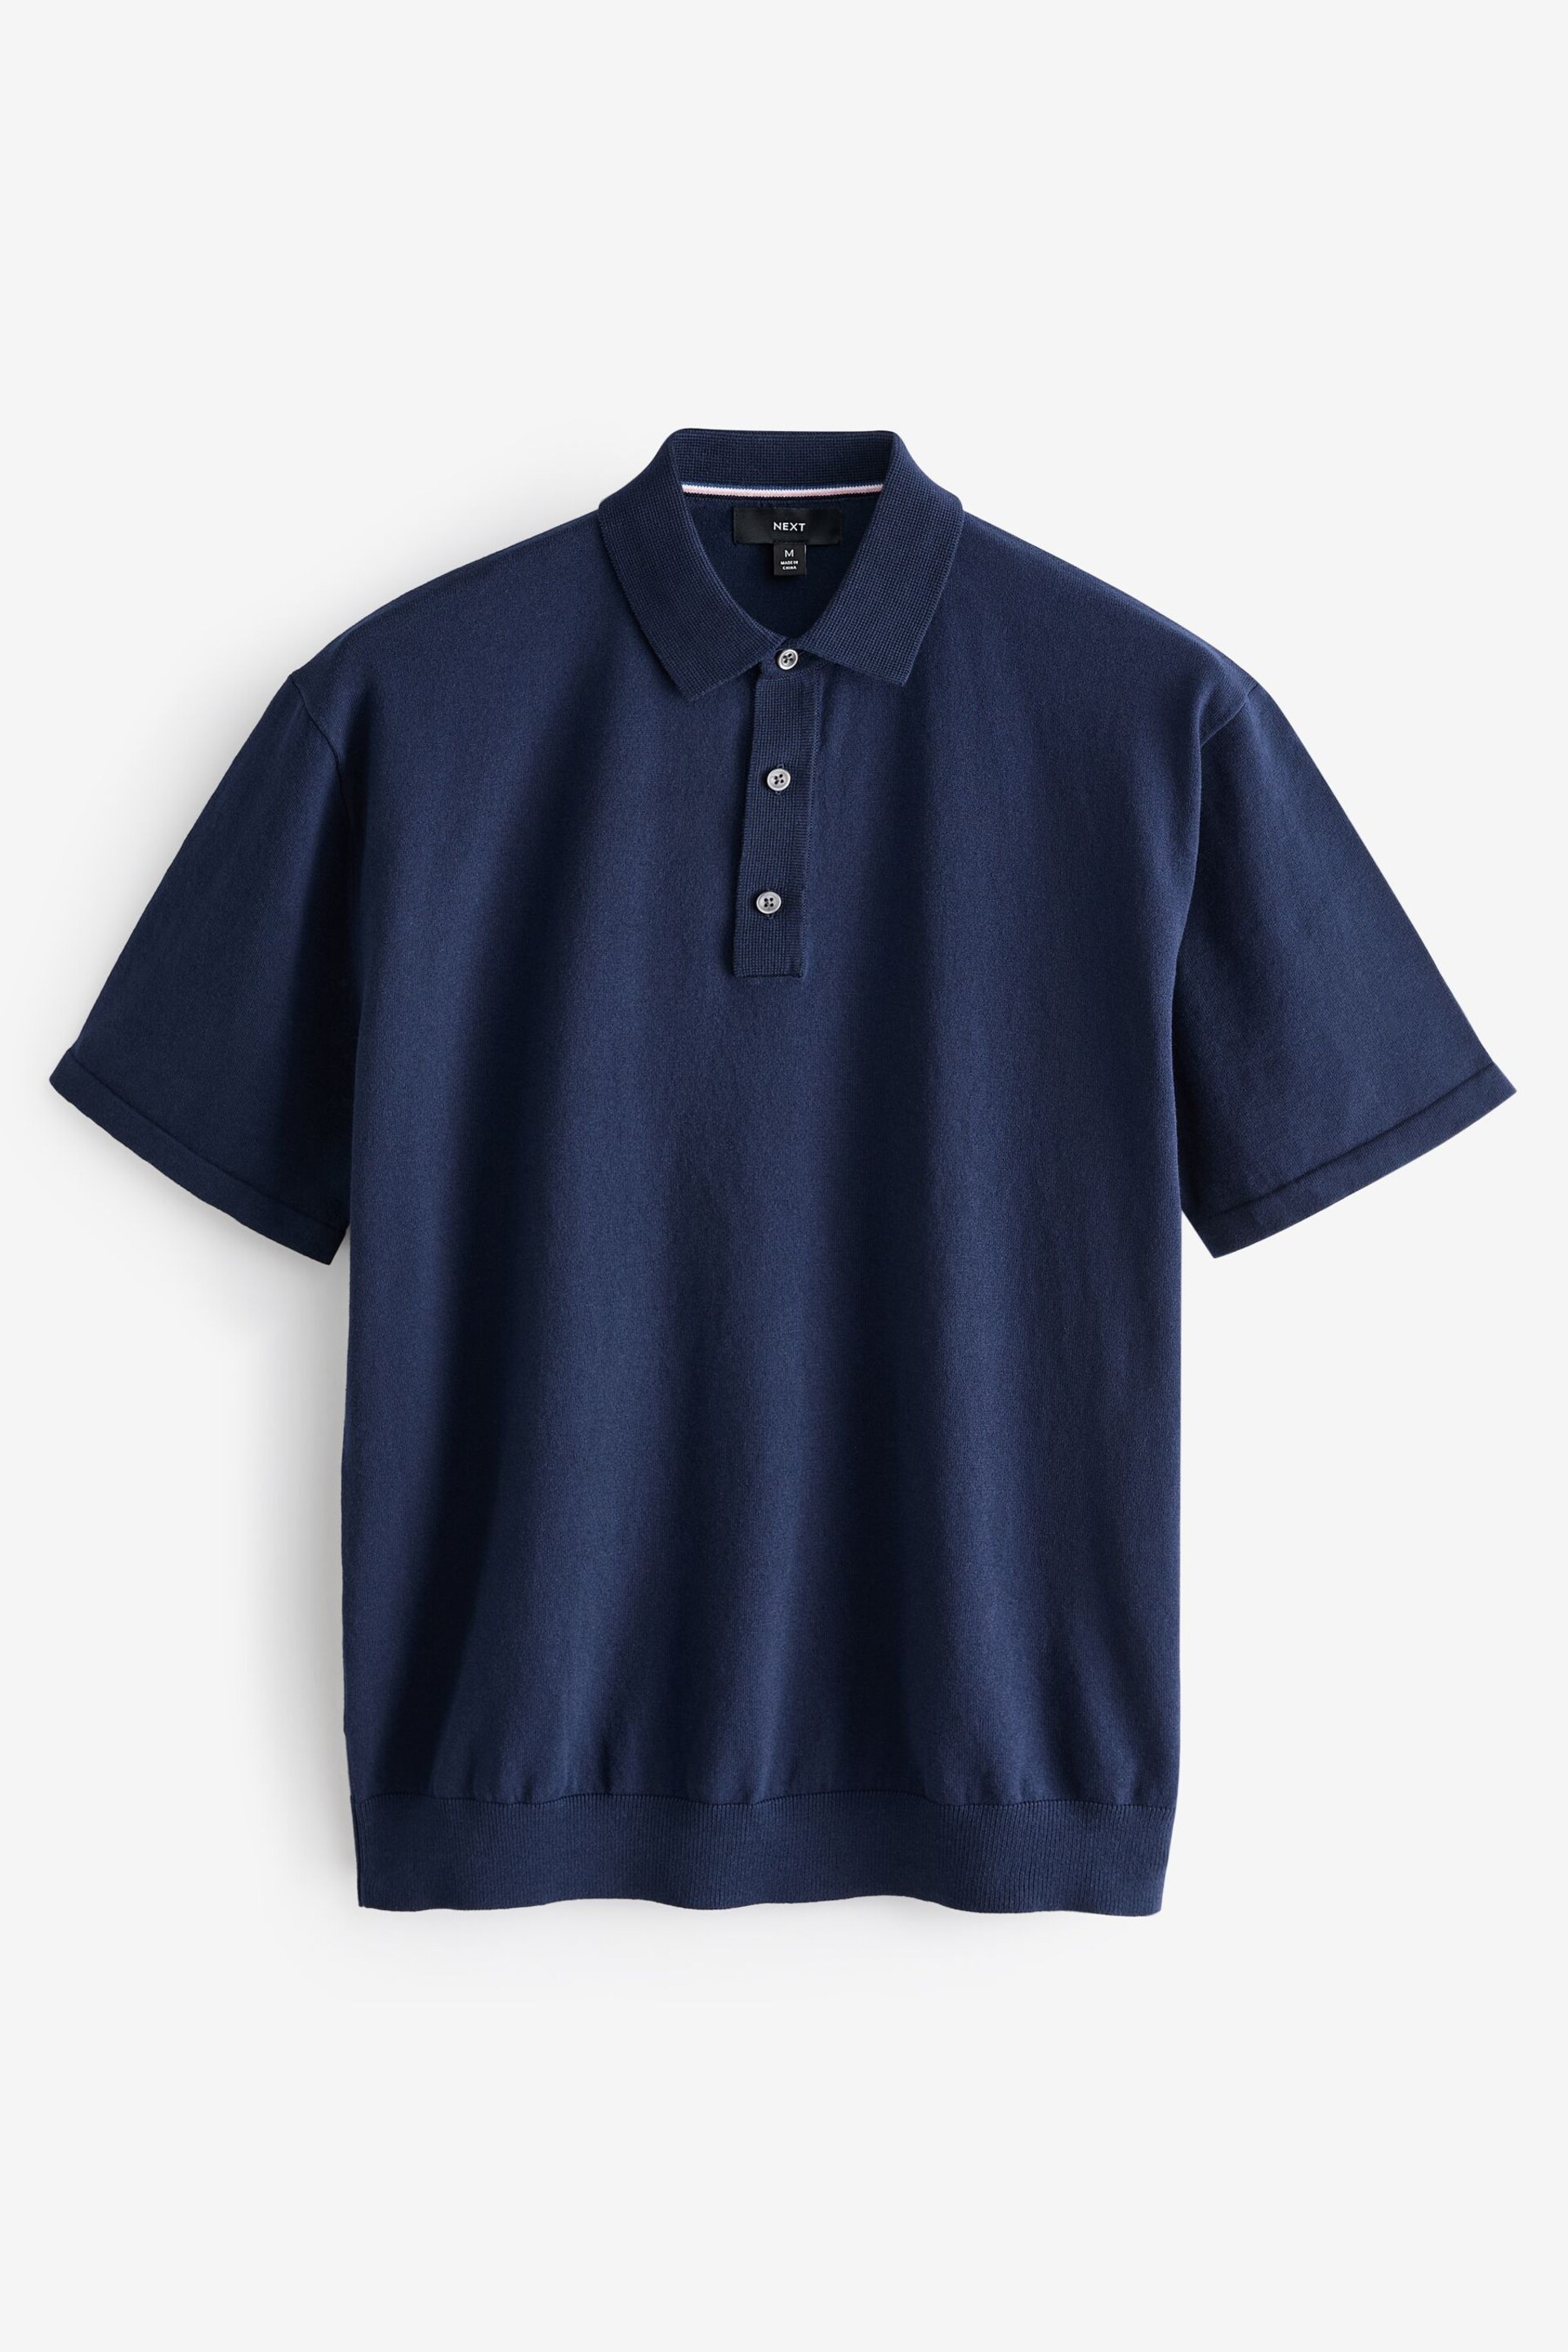 Black/Navy Knitted Regular Fit 2 Pack Polo Shirts - Image 10 of 13